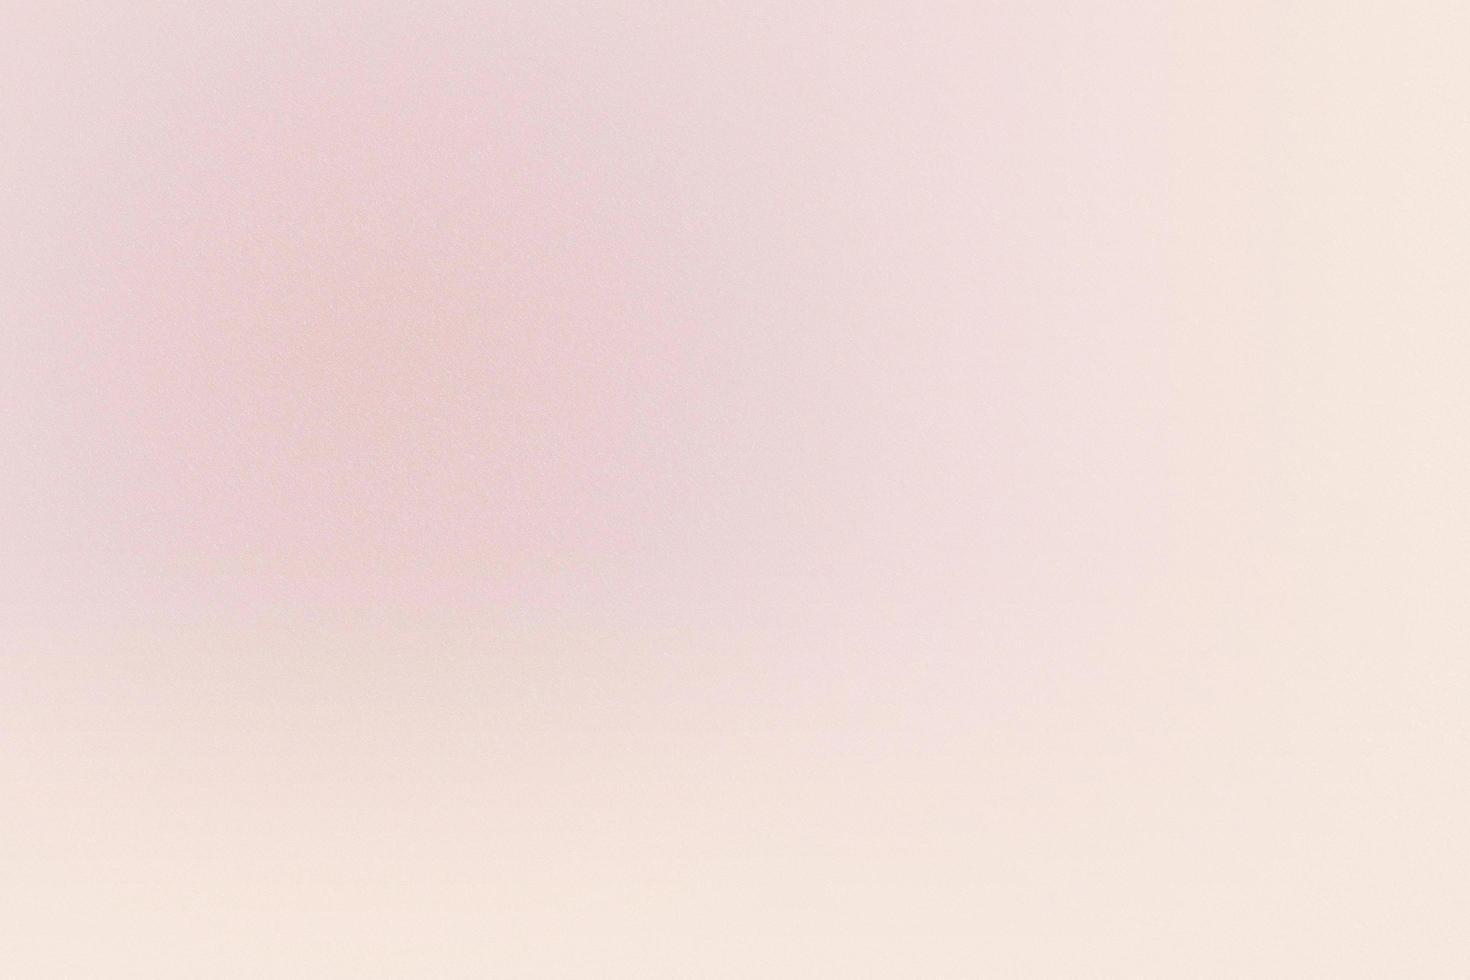 Texture of thin light pink paper, abstract background photo